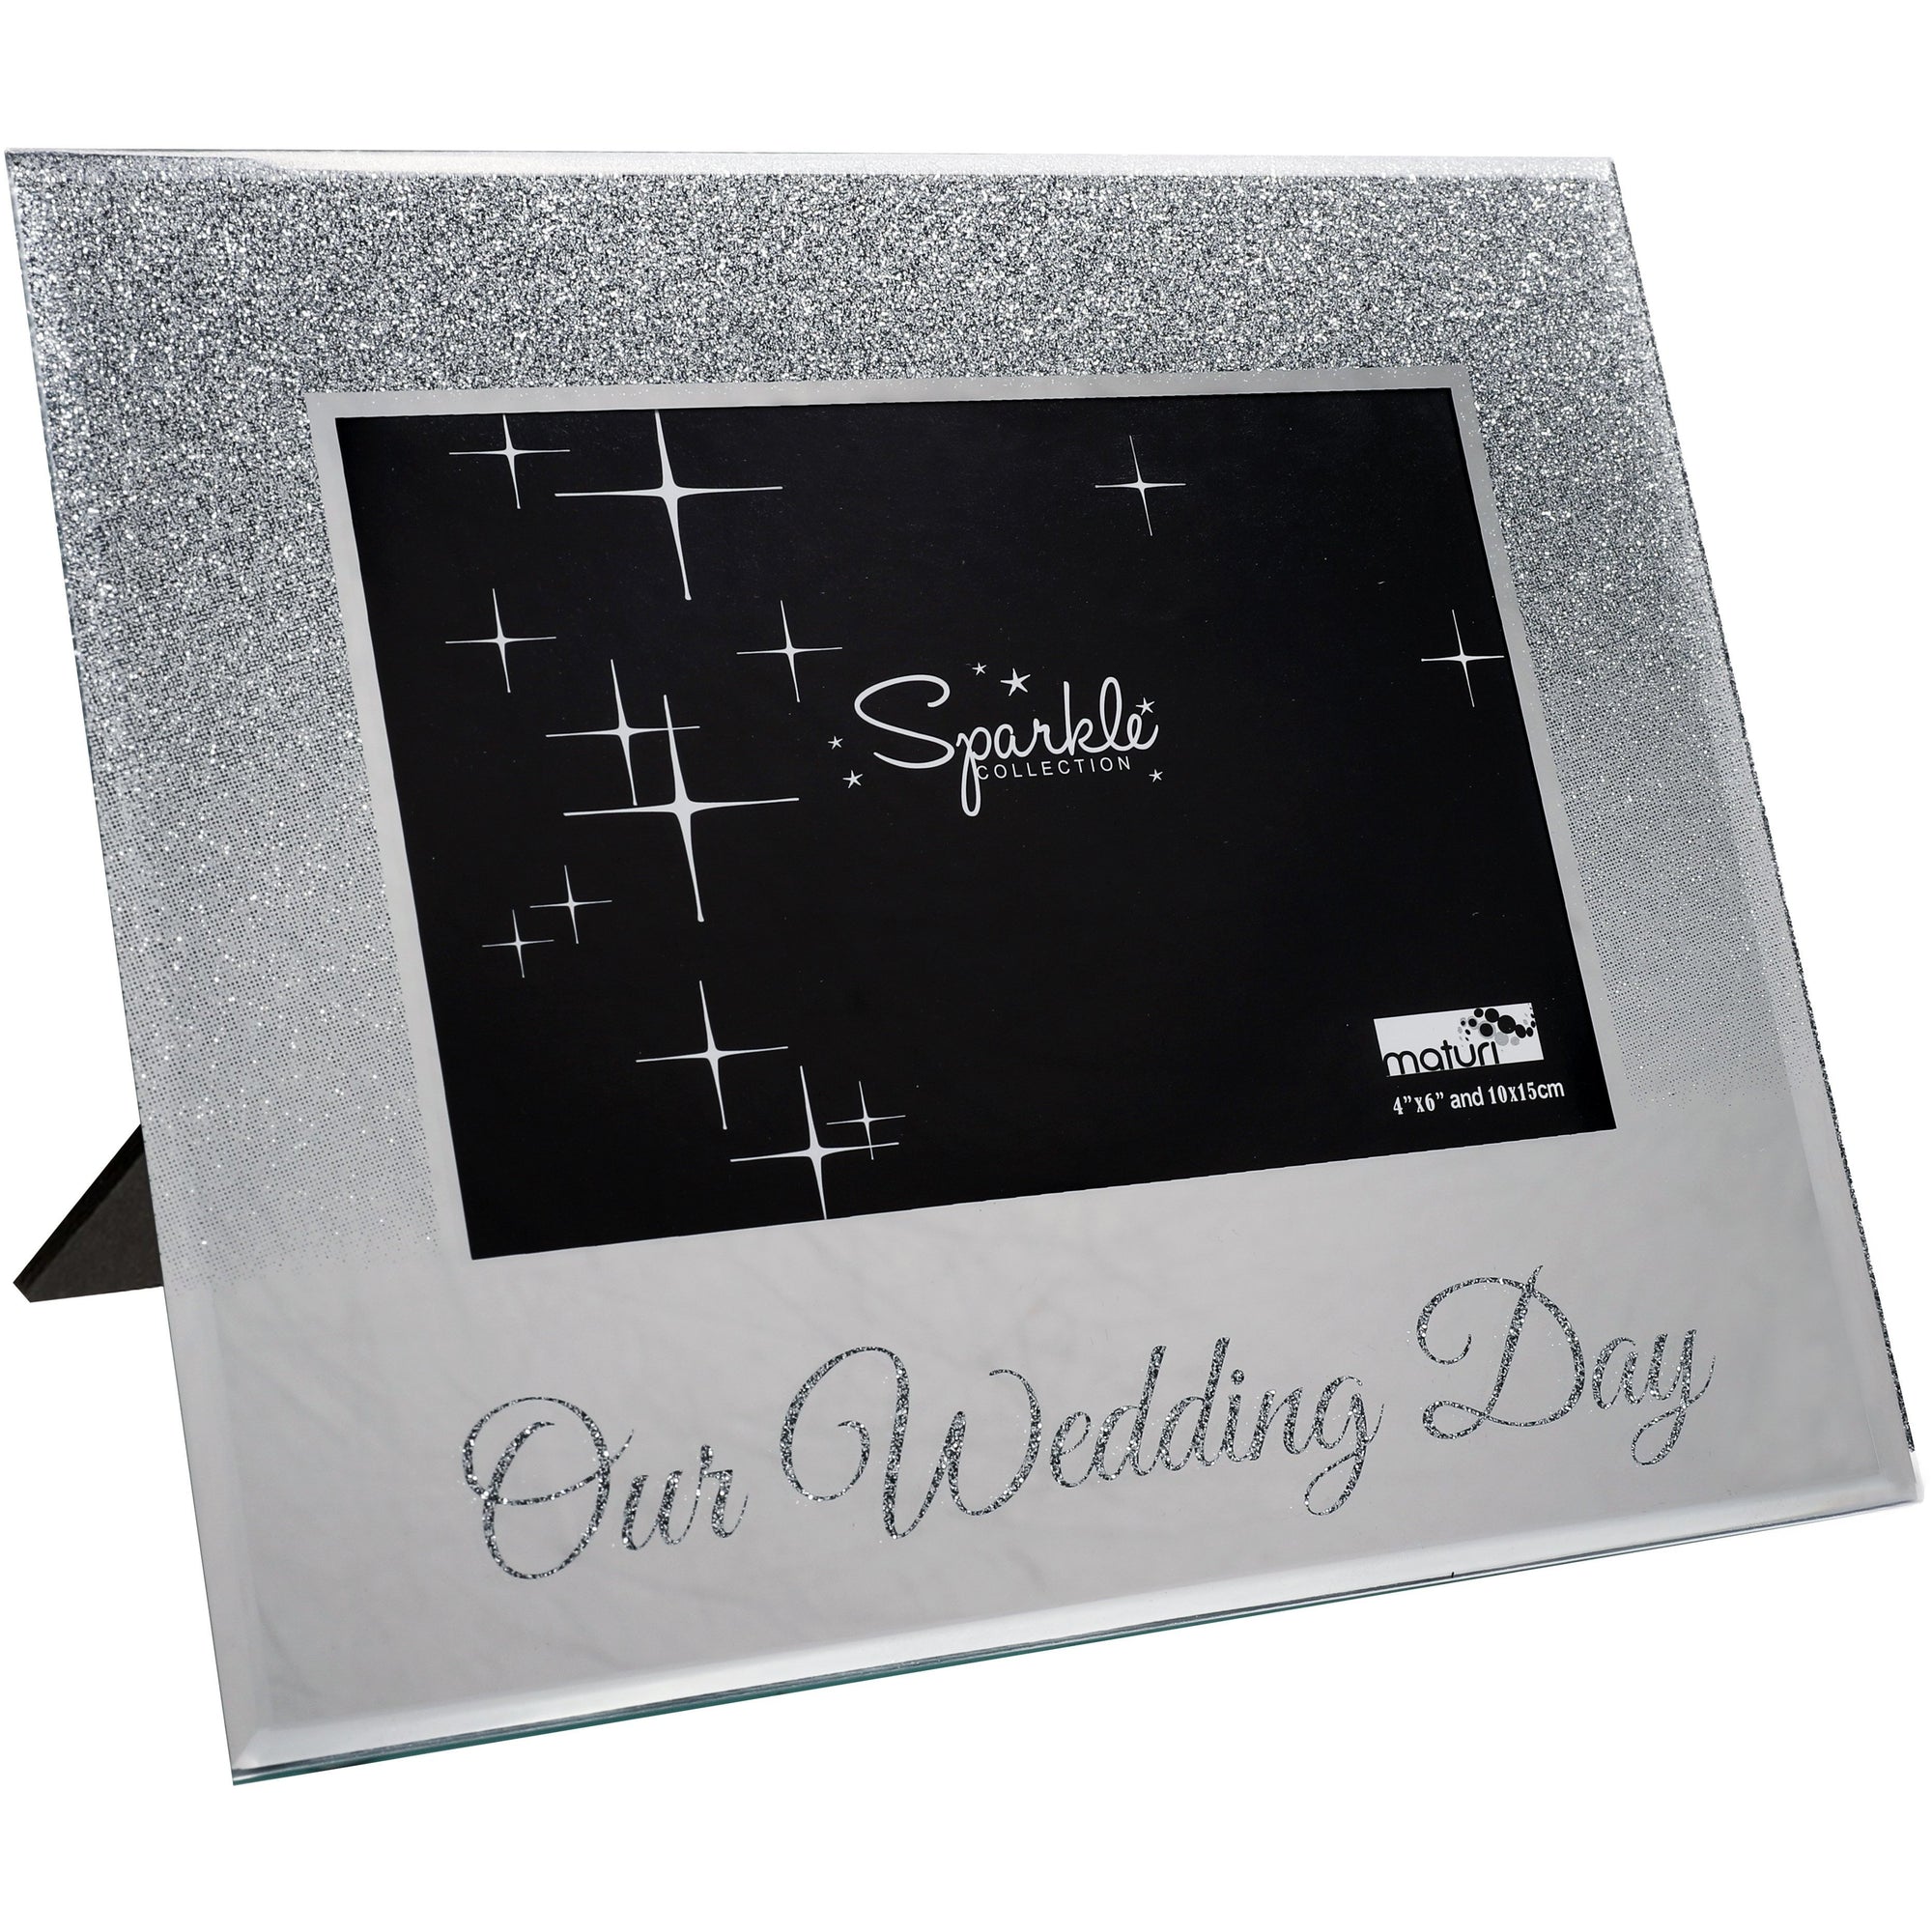 Our Wedding Day Mirrored Silver Glitter 6 x 4 Inch Photo Frame